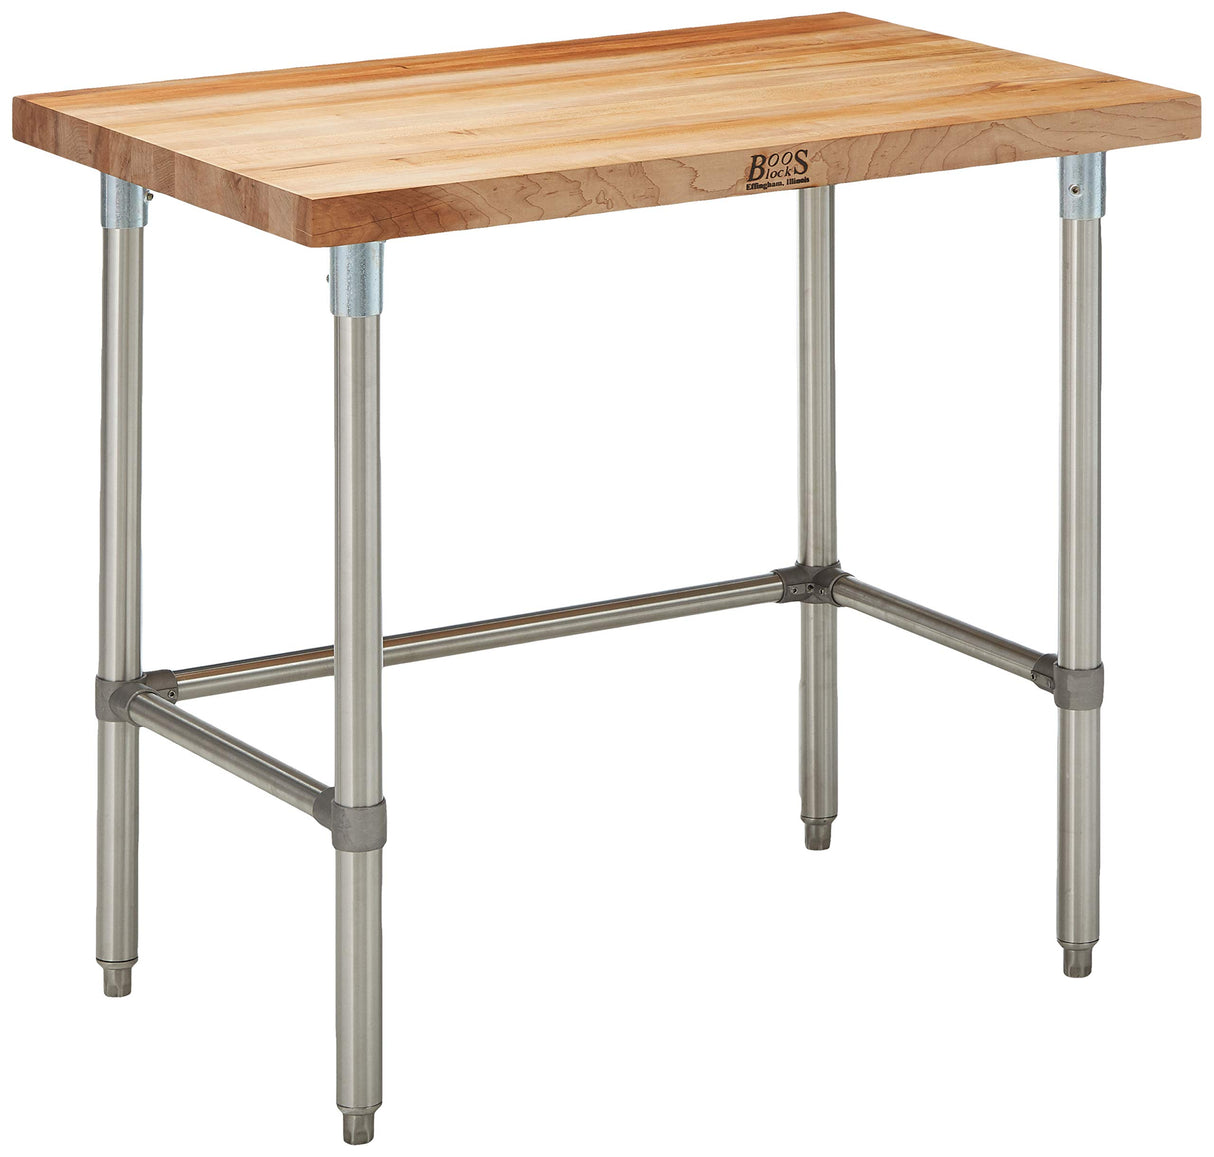 John Boos SNB13 SNB02 Maple Top Work Table with Stainless Steel Base and Bracing, 48" Long x 24" Wide 1-3/4" Thick